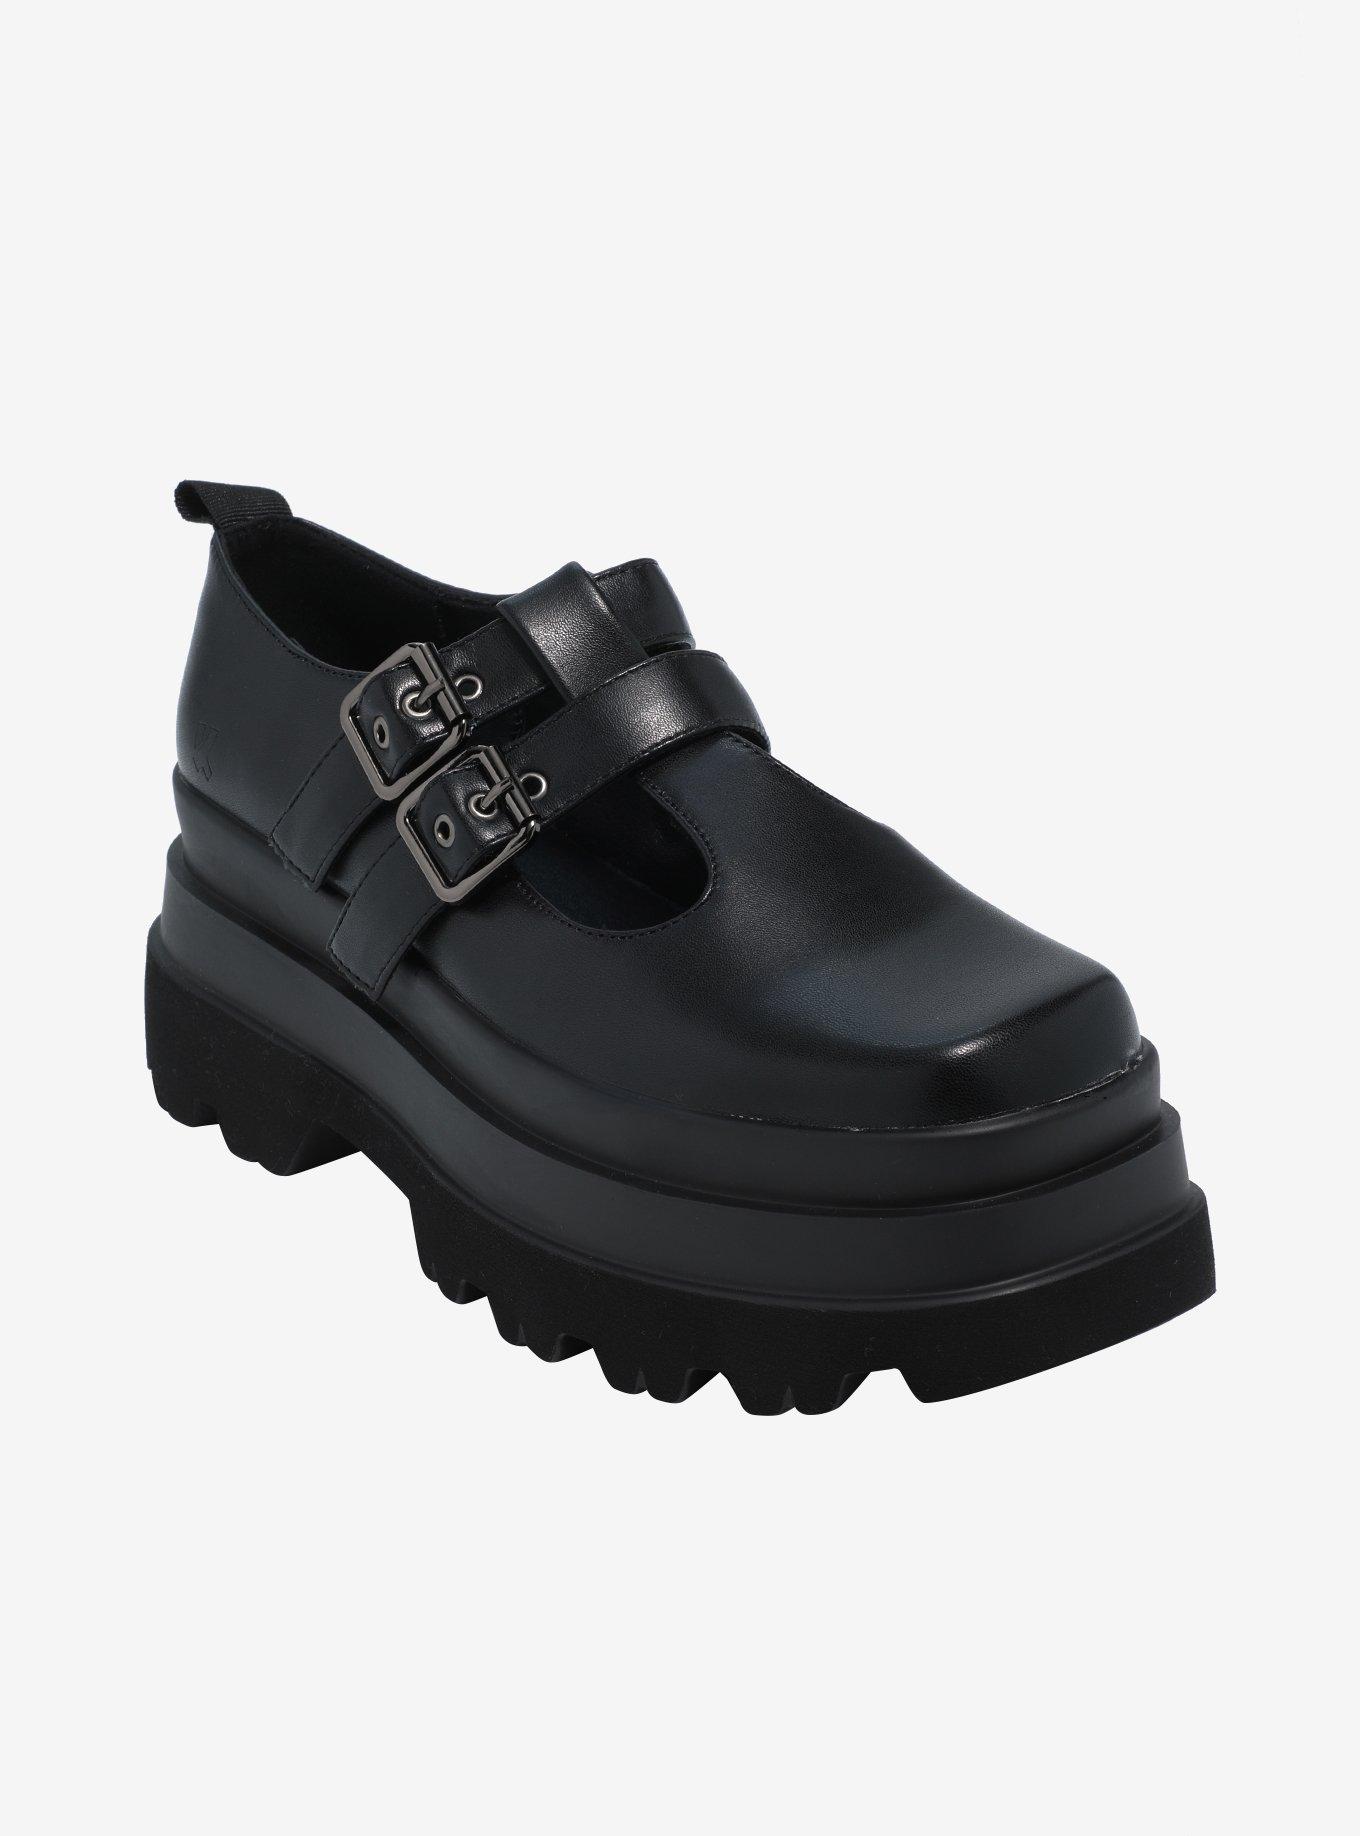 Koi Black Double Buckle Strap Mary Janes, MULTI, hi-res